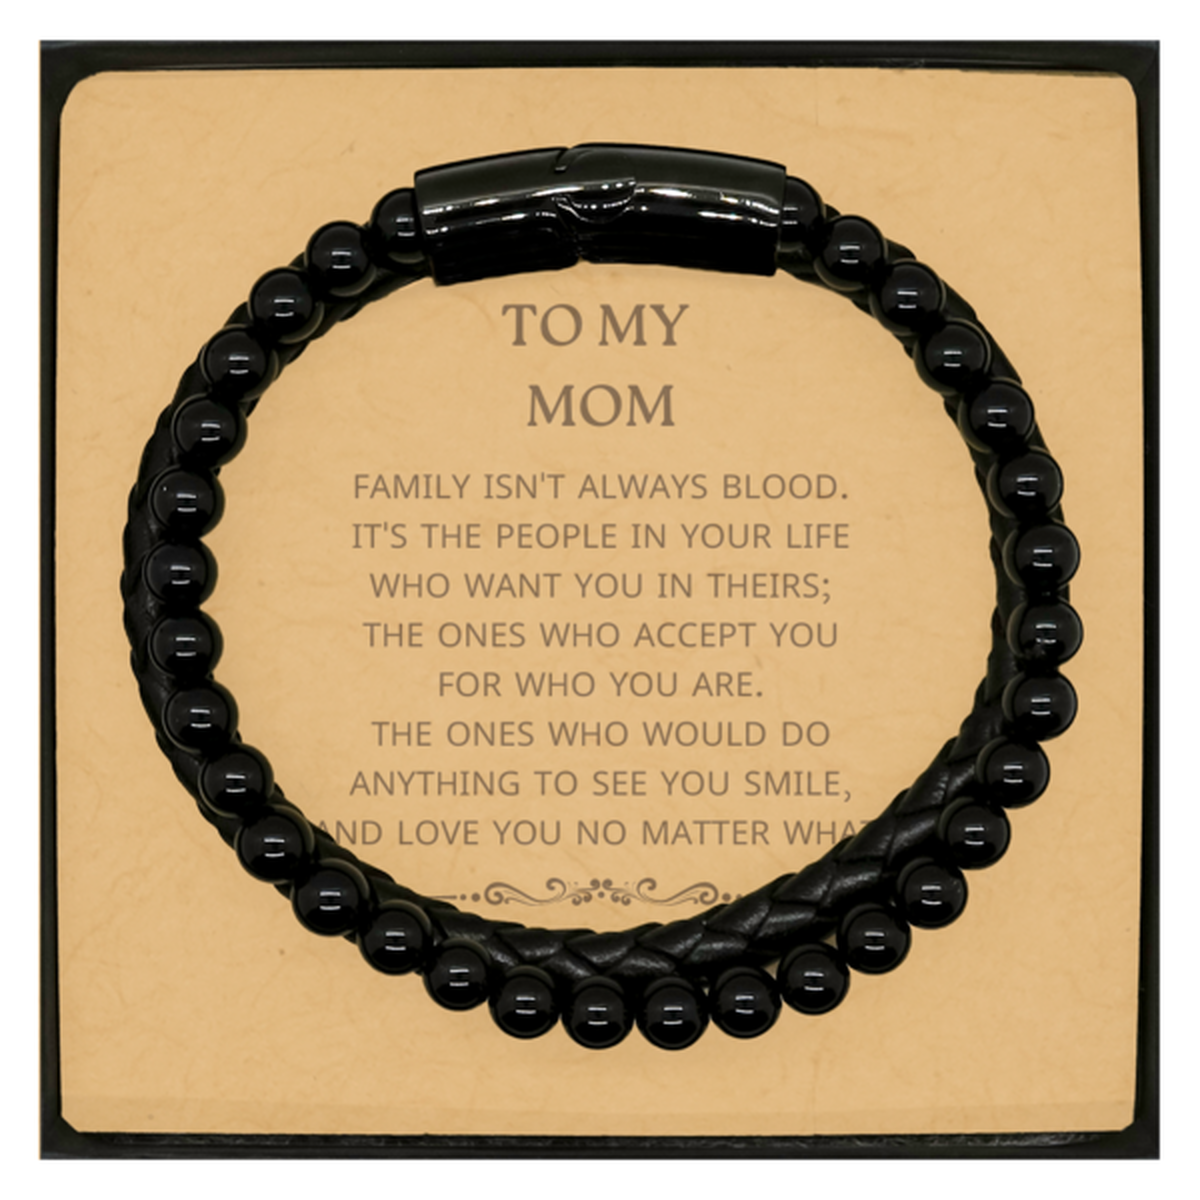 To My Mom Gifts, Family isn't always blood, Mom Stone Leather Bracelets, Birthday Christmas Unique Present For Mom